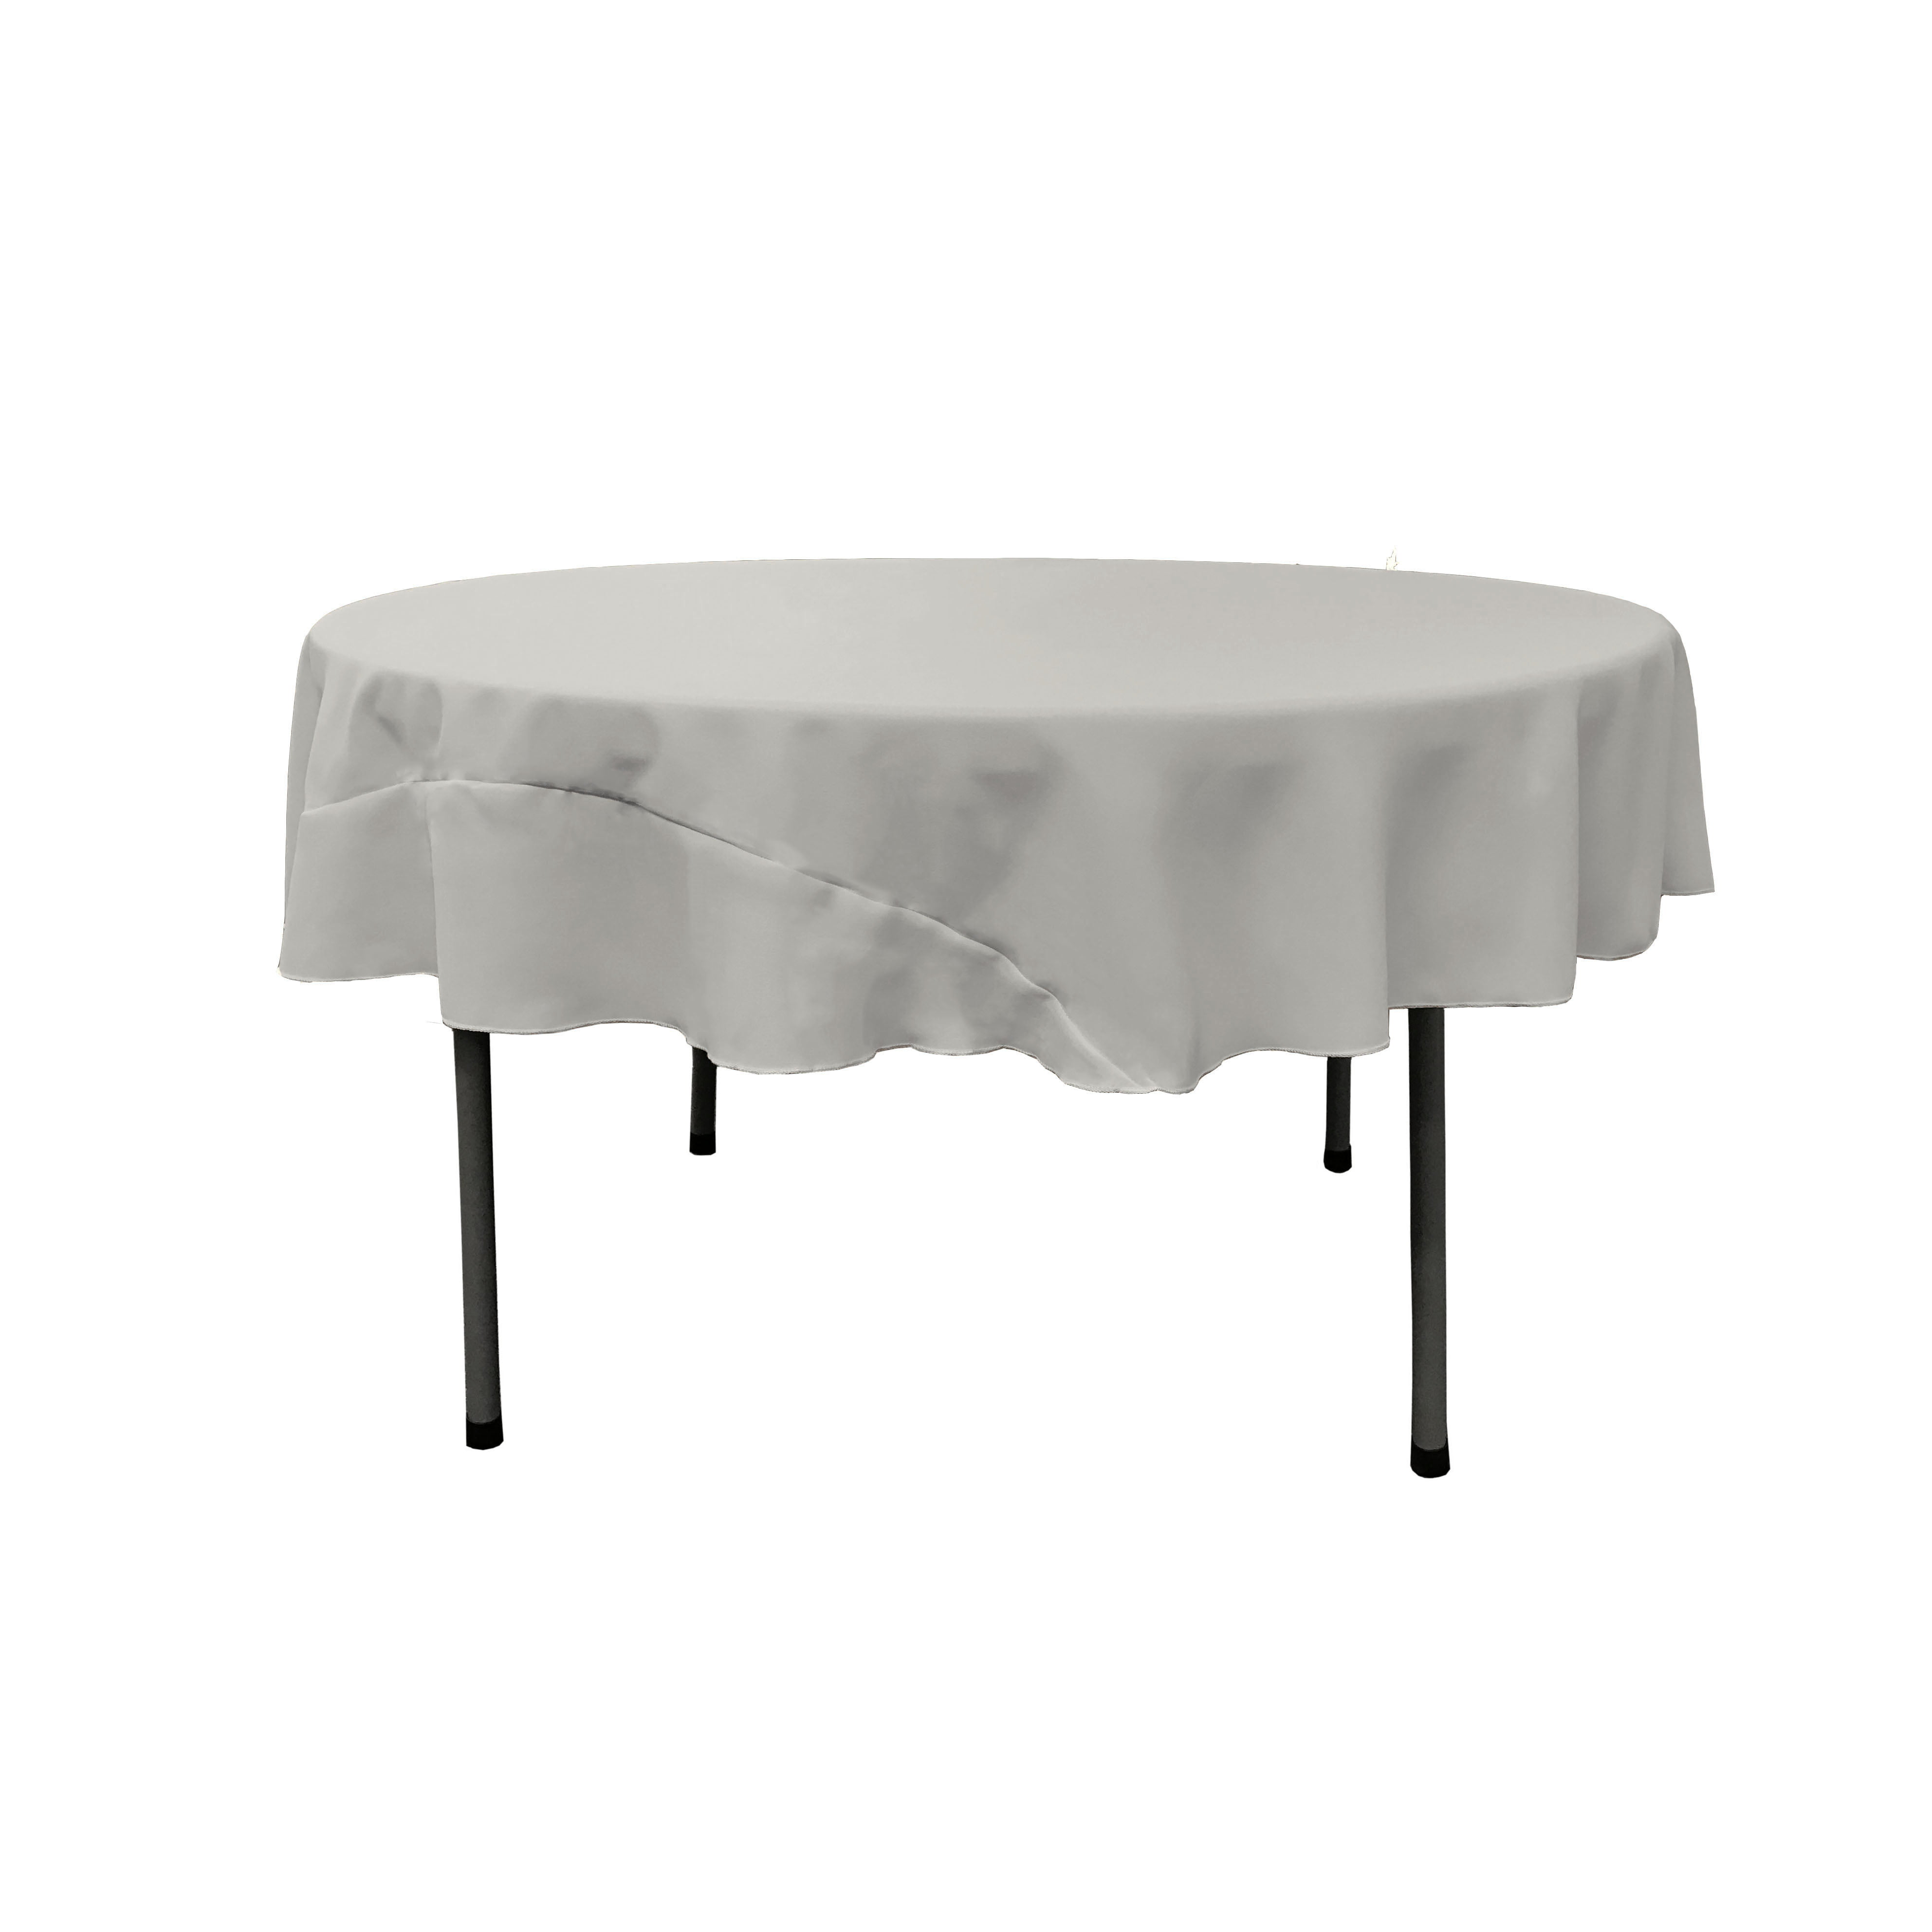 La Linen Polyester Poplin Tablecloth 72, 72 In Round Tablecloth